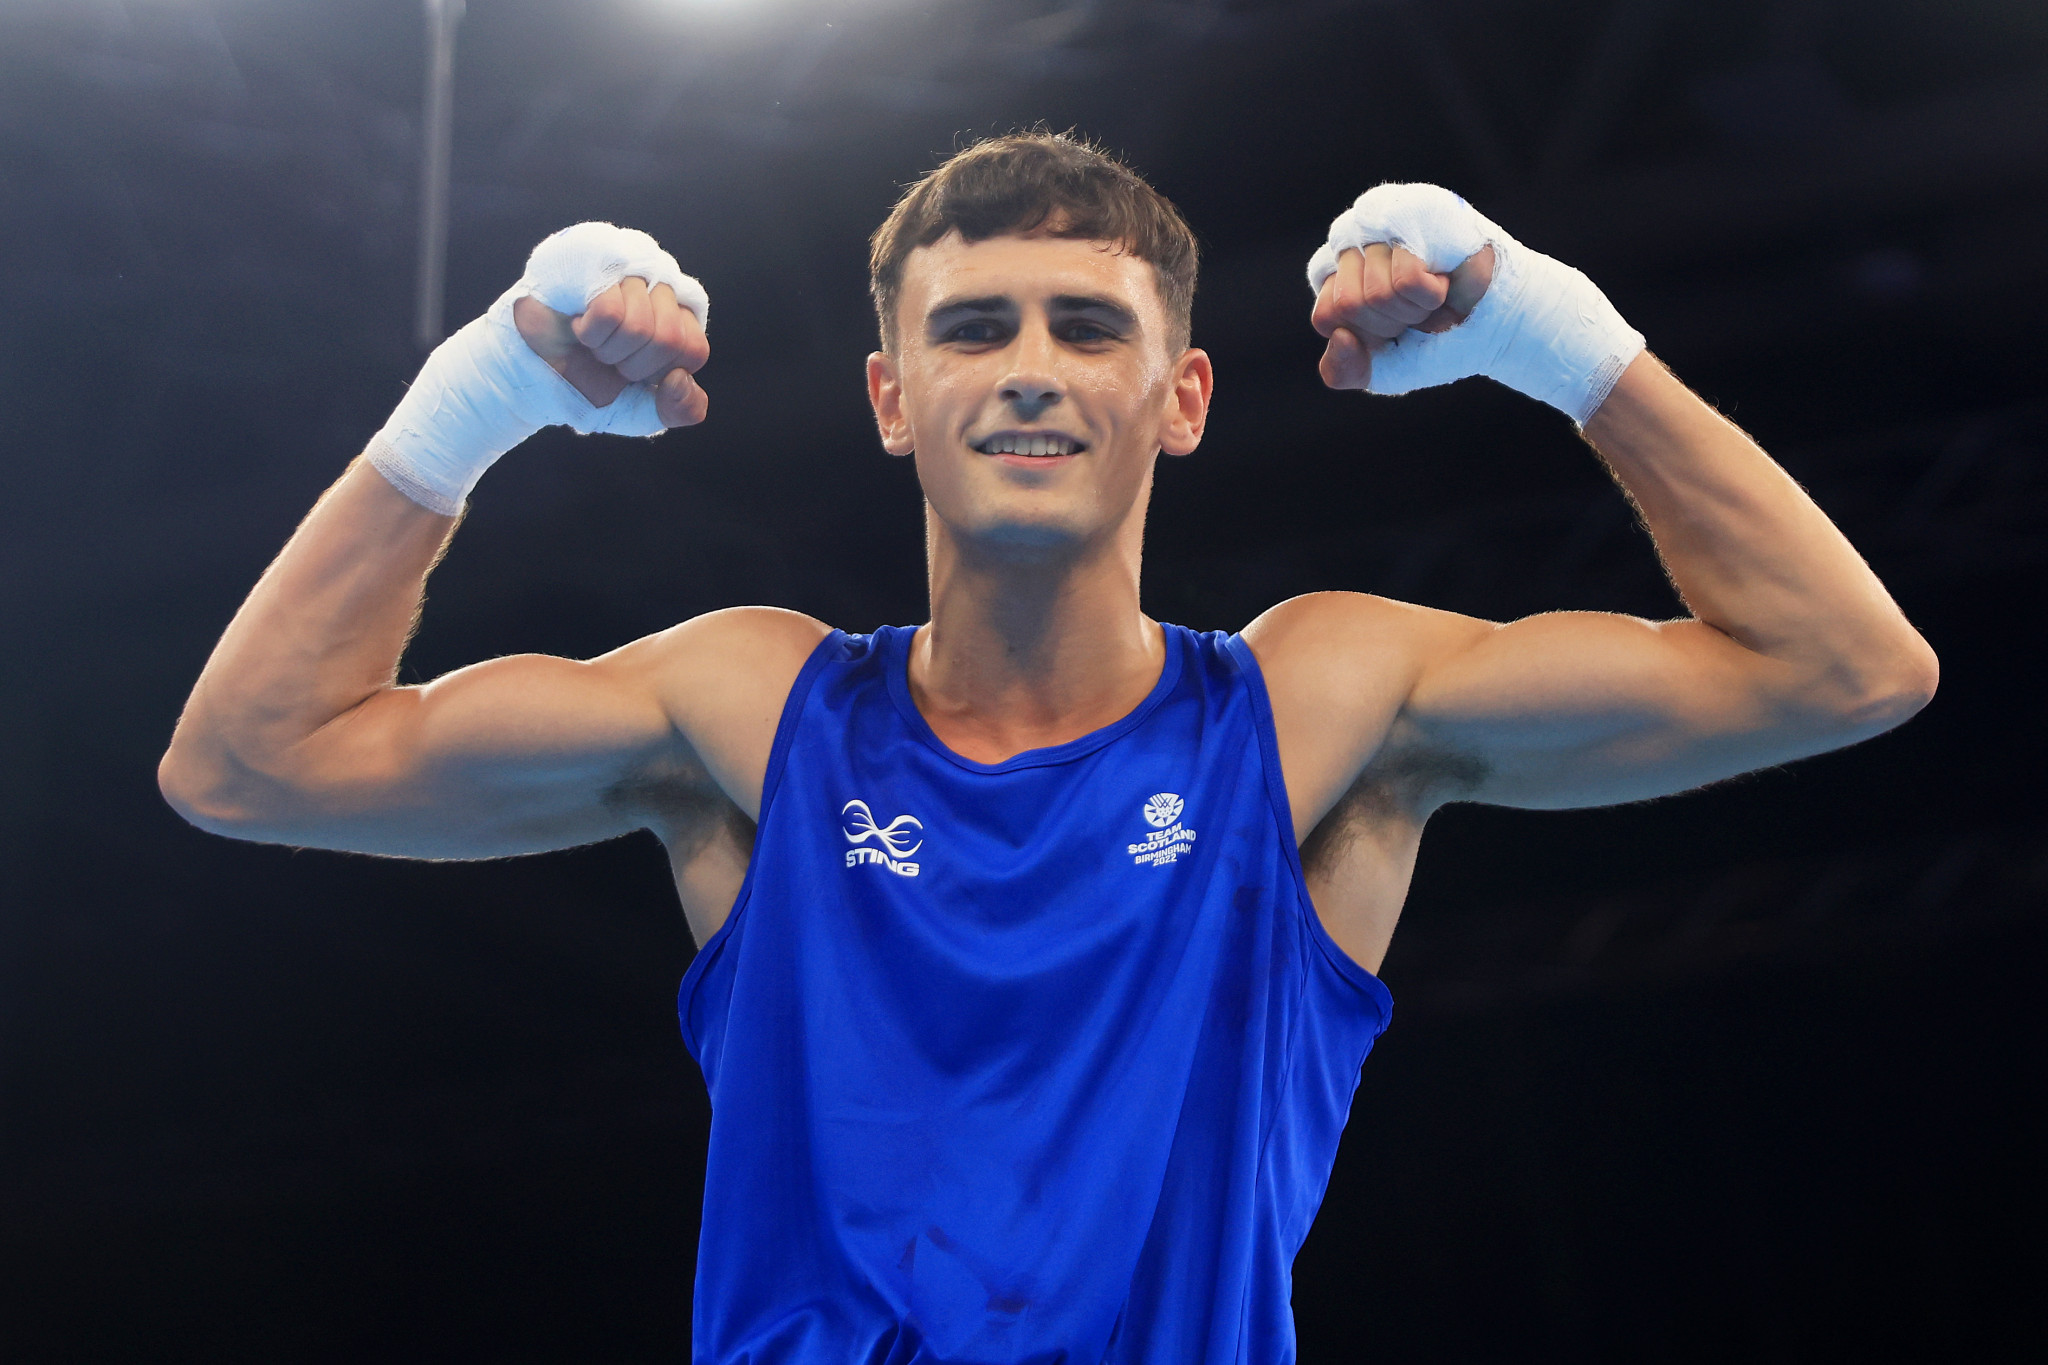 Scottish boxing world bronze medallist Reese Lynch won his opening match in the under-63.5kg ©Getty Images